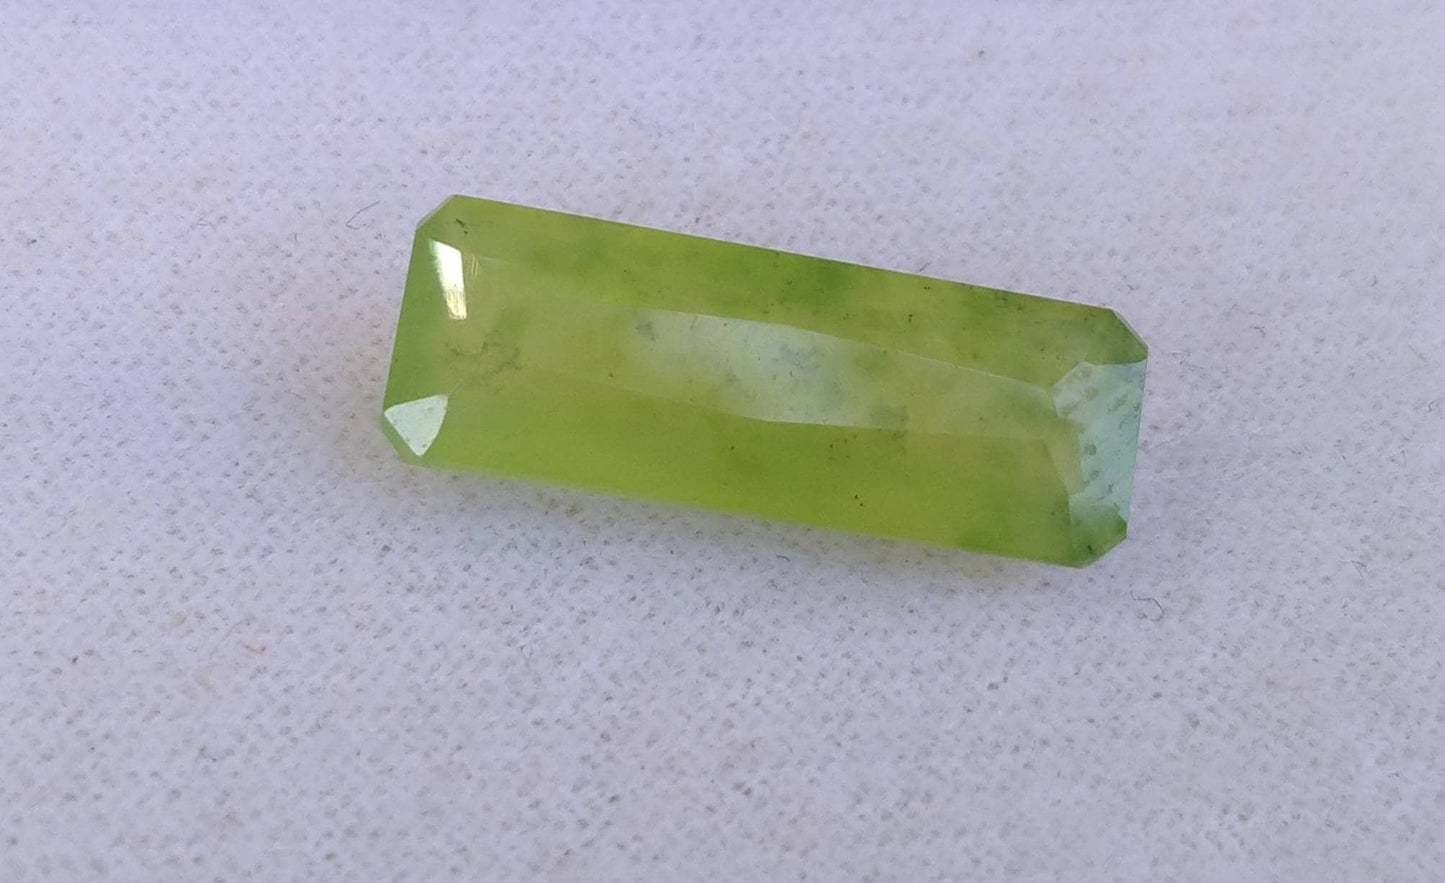 ARSAA GEMS AND MINERALSNatural top quality beautiful 9 carats radiant cut shape faceted green hydrograssular garnet gem - Premium  from ARSAA GEMS AND MINERALS - Just $20.00! Shop now at ARSAA GEMS AND MINERALS